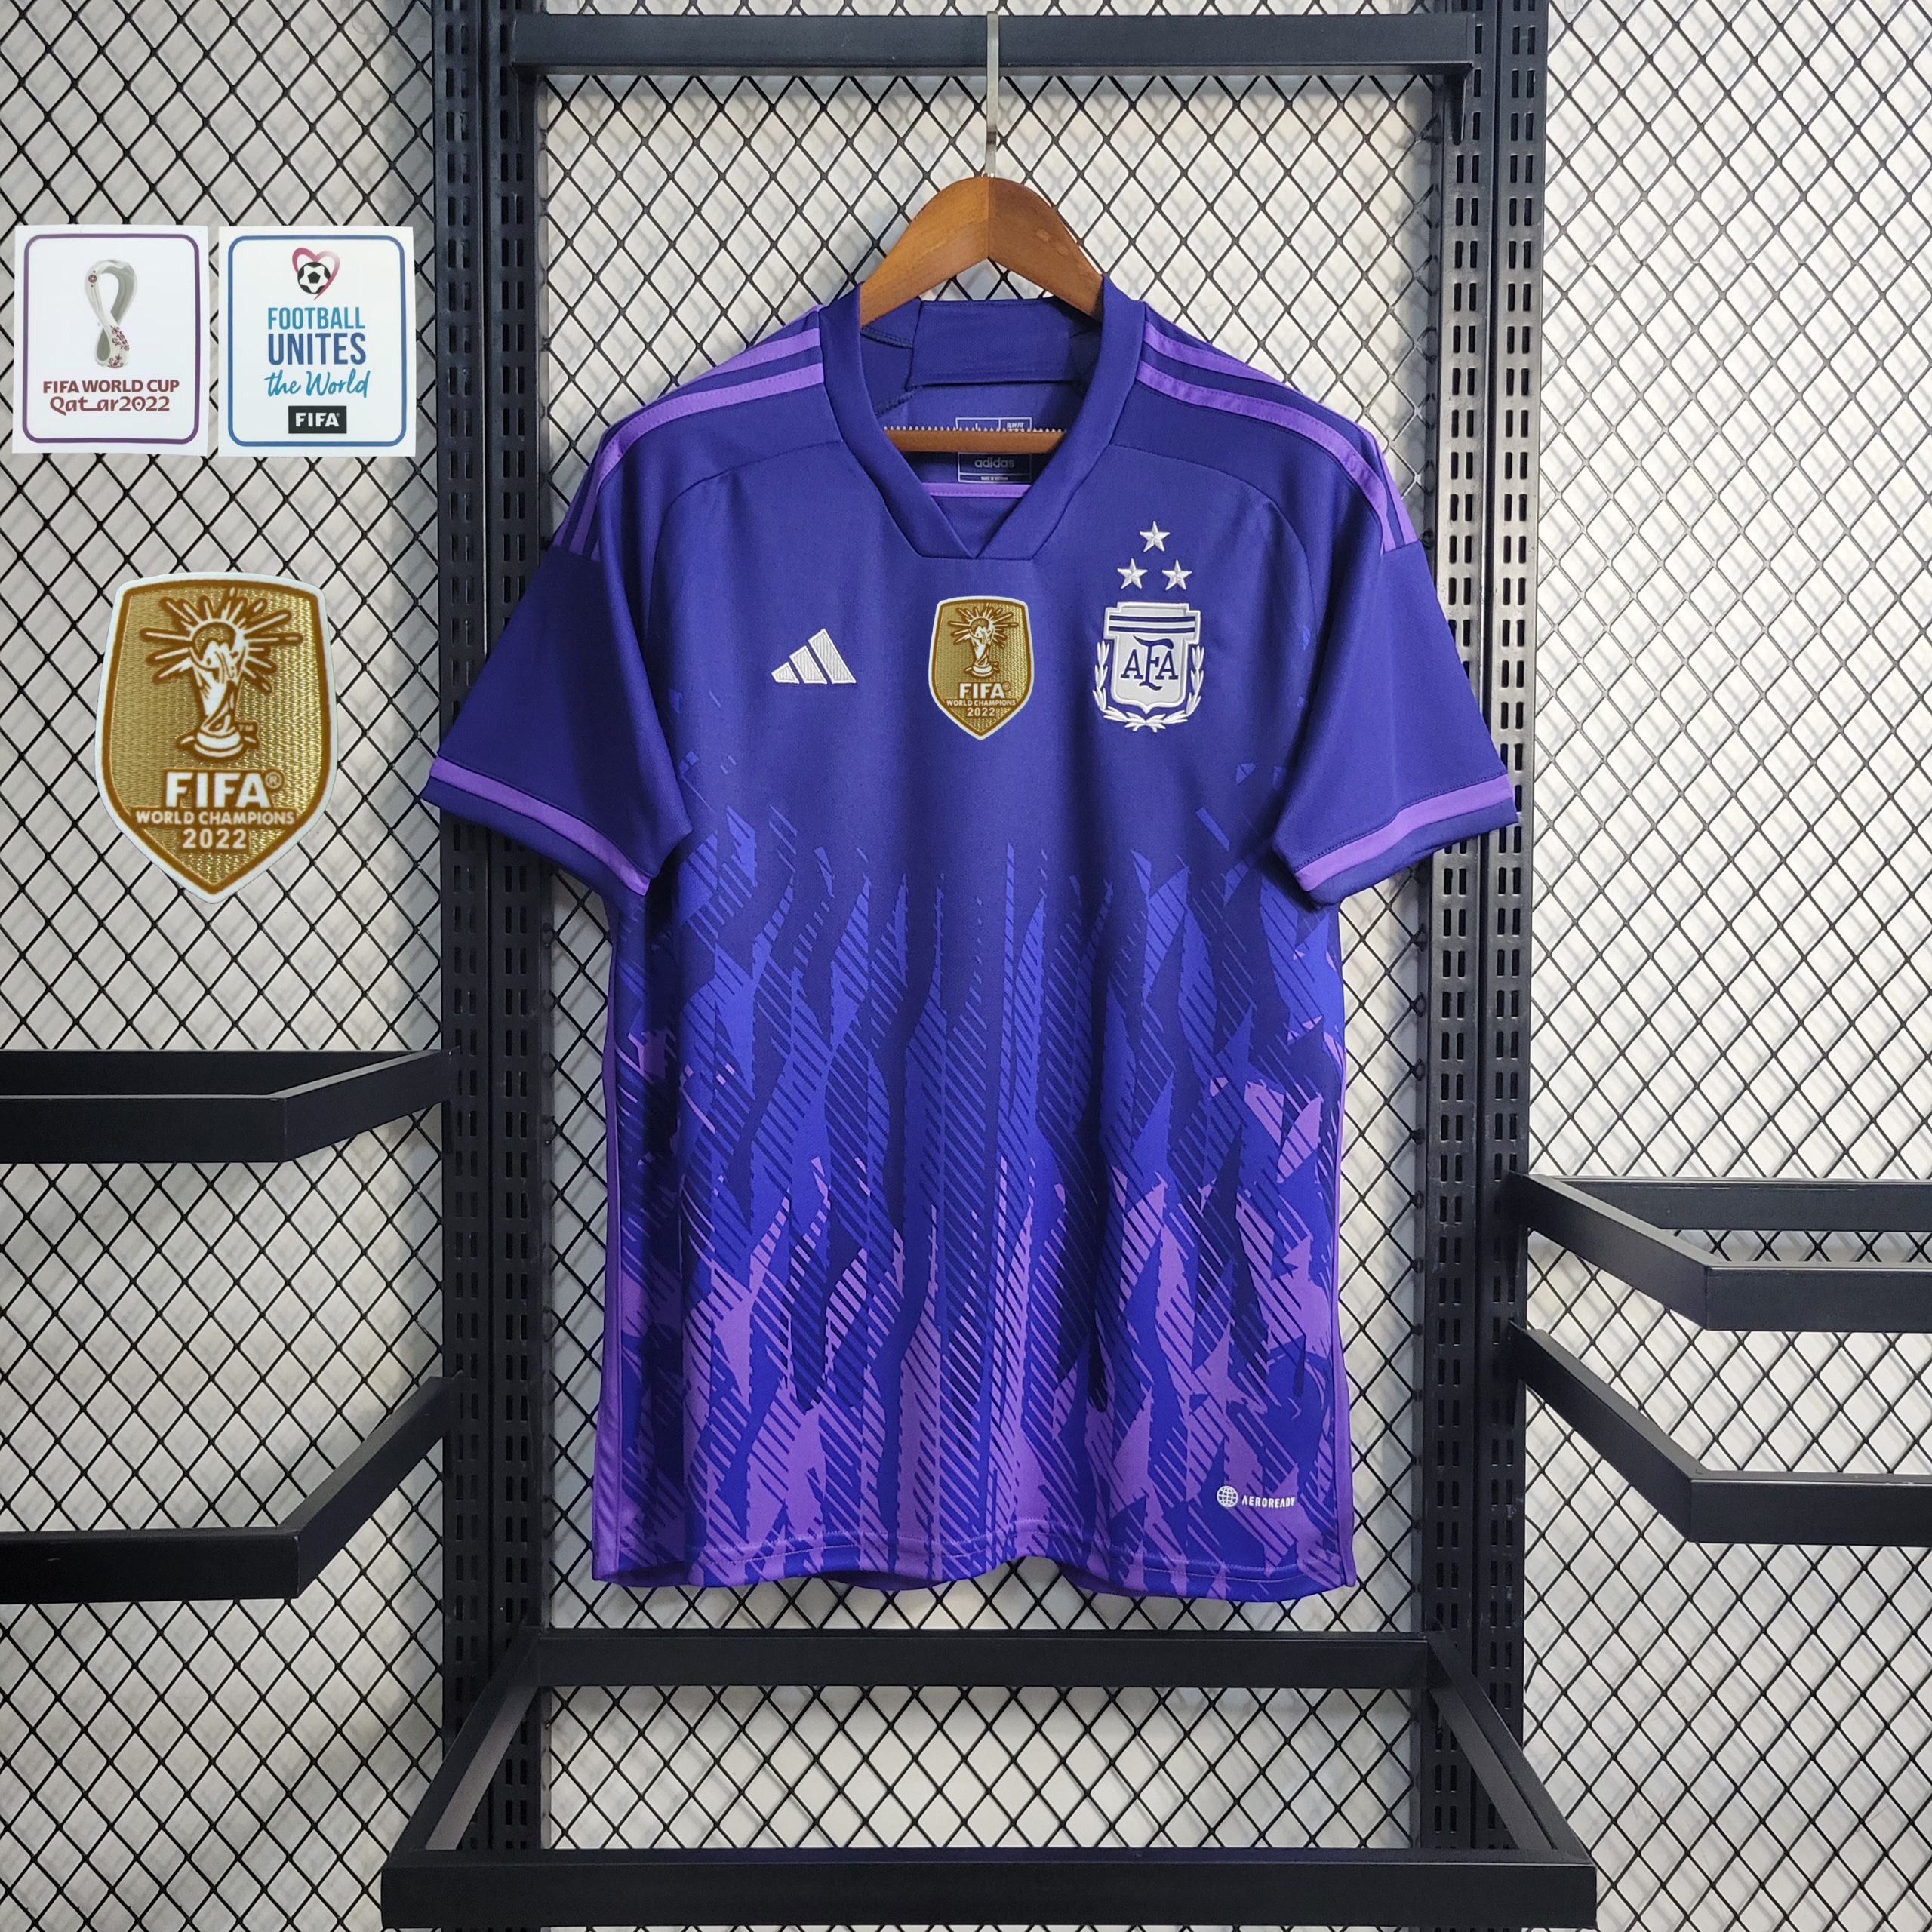 Adidas Argentina 3-Star Kit Full Release - Now Available